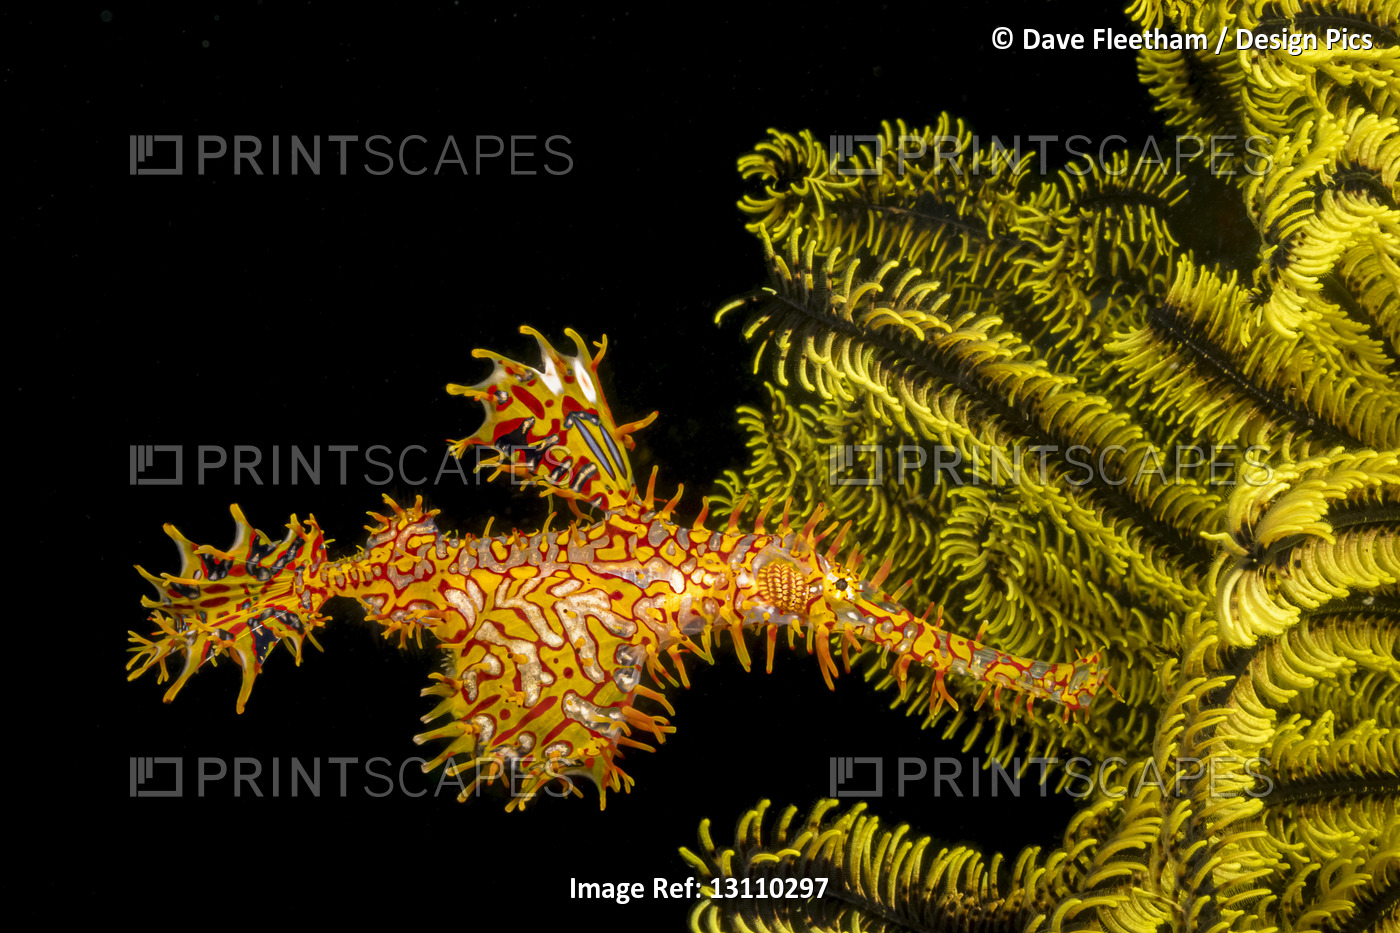 An Ornate or Harlequin Ghost Pipefish (Solenostomus paradoxus) beside a ...